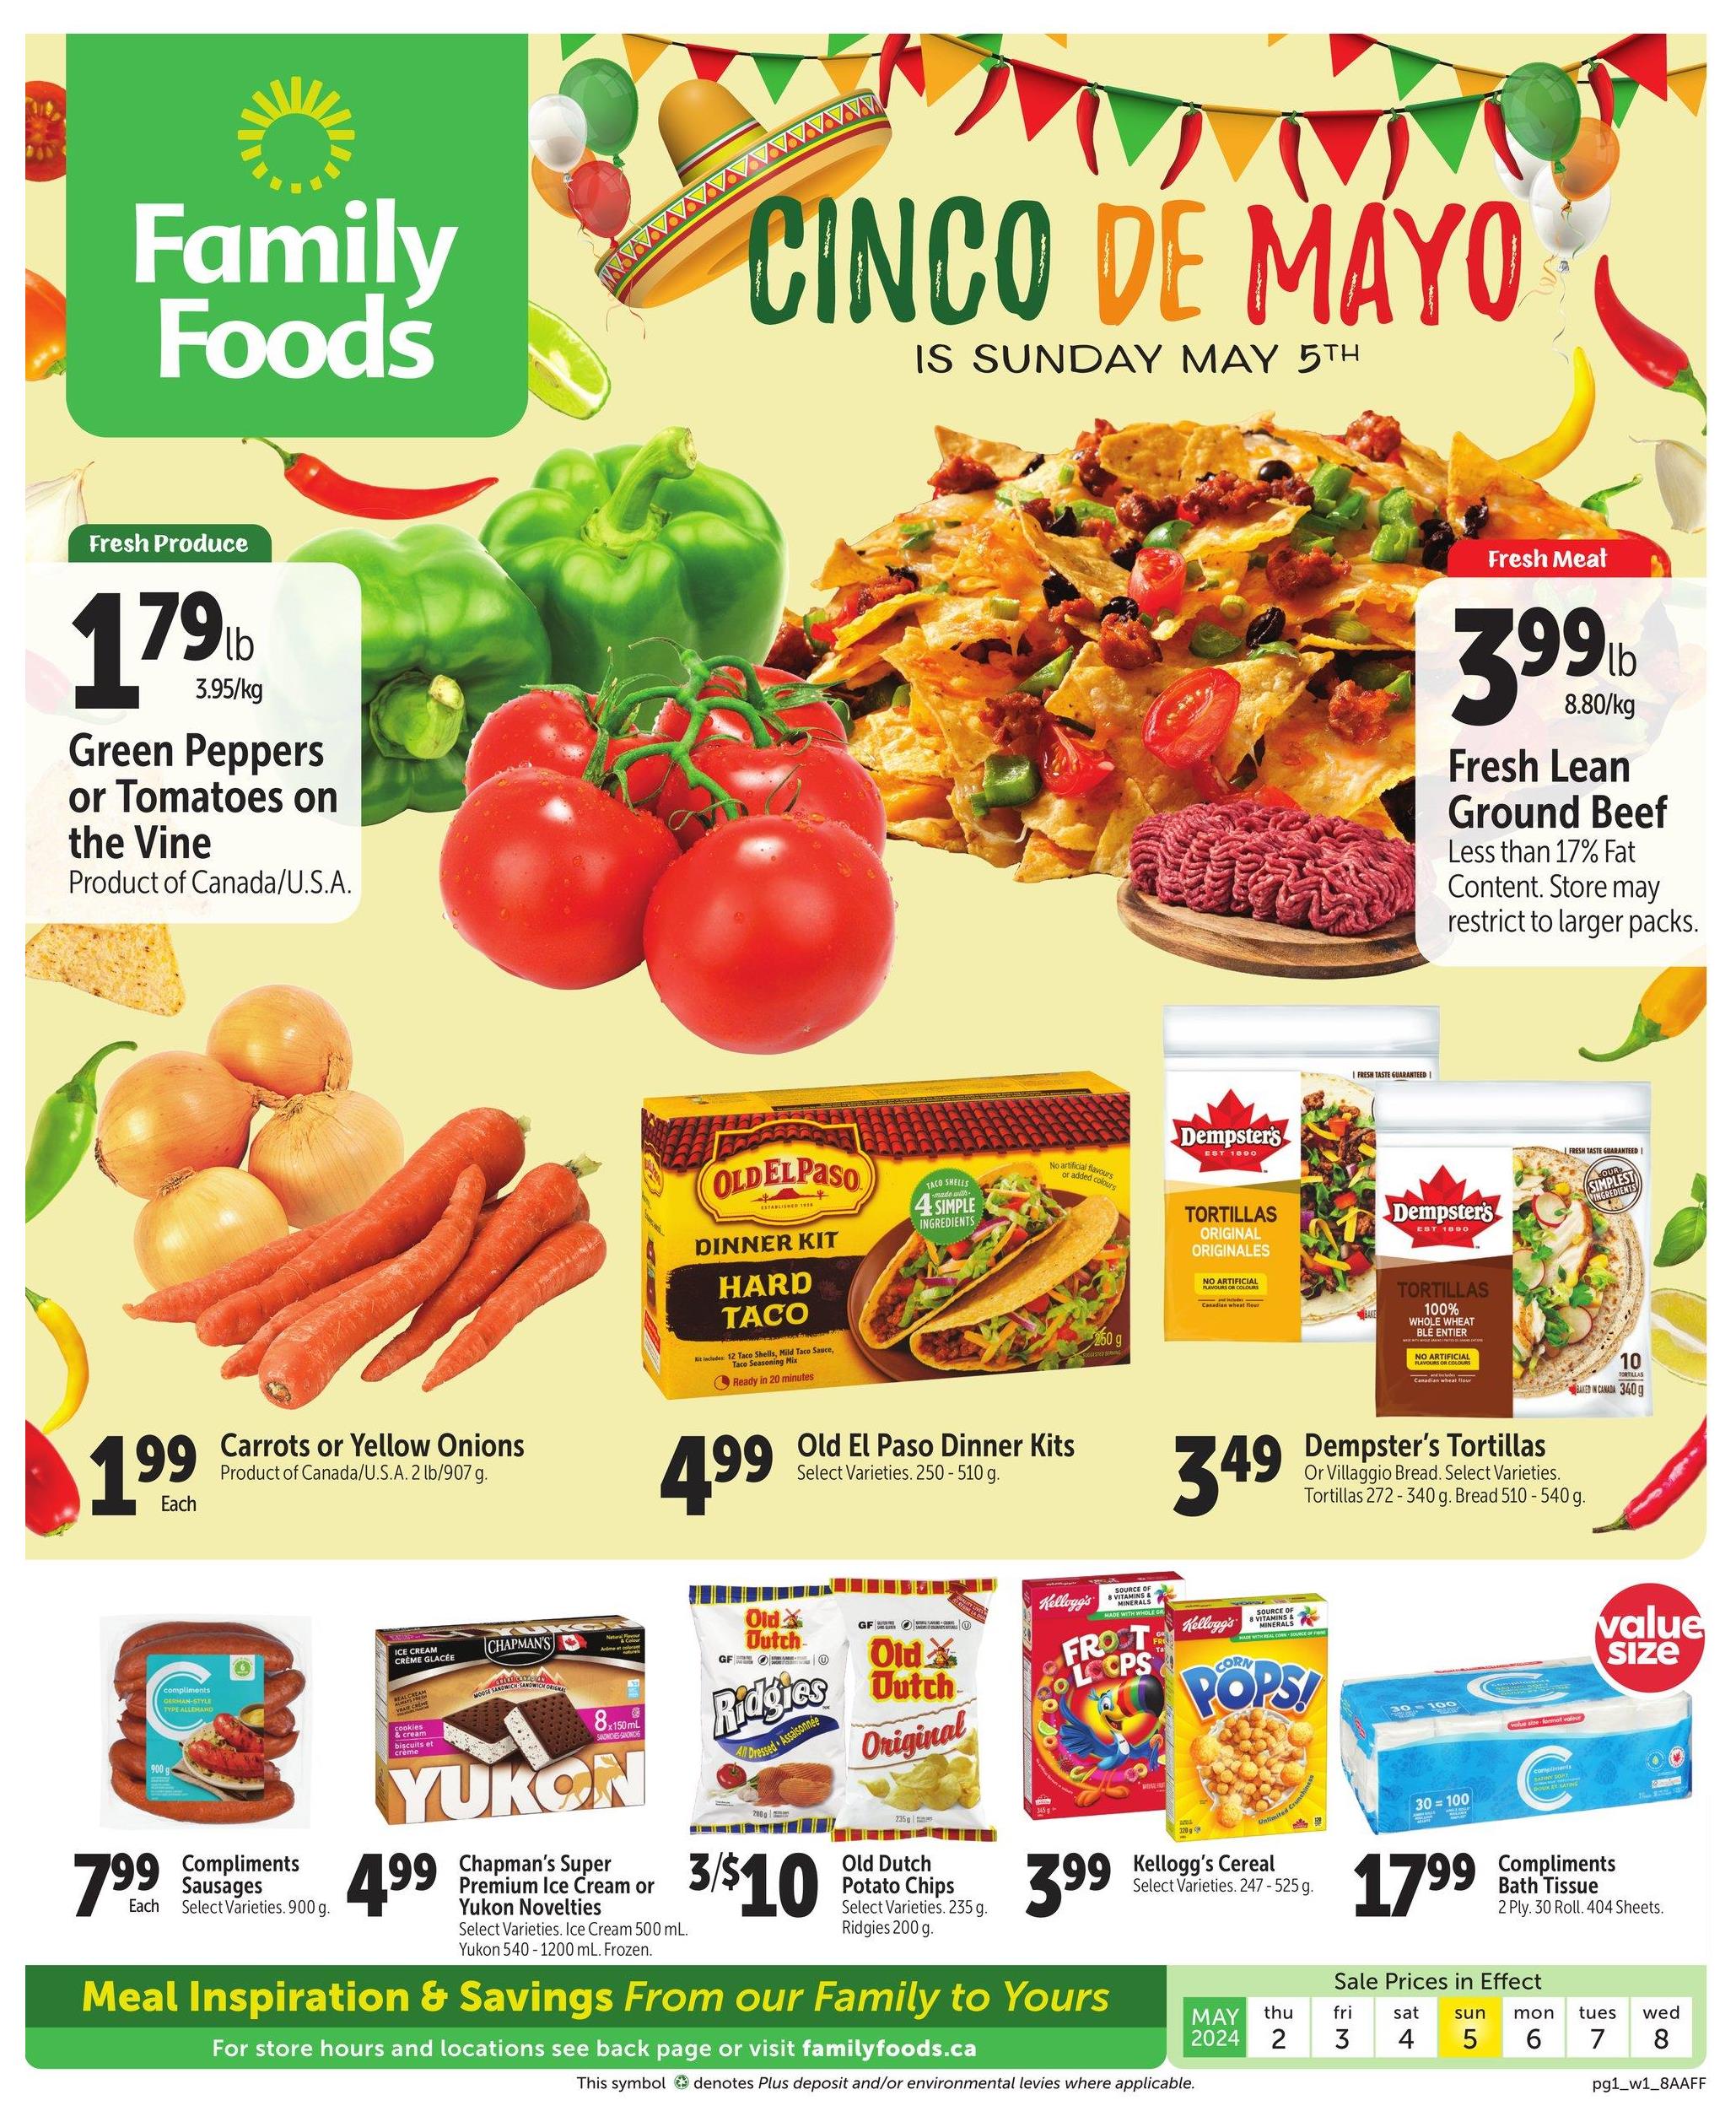 Family Foods - Weekly Flyer Specials